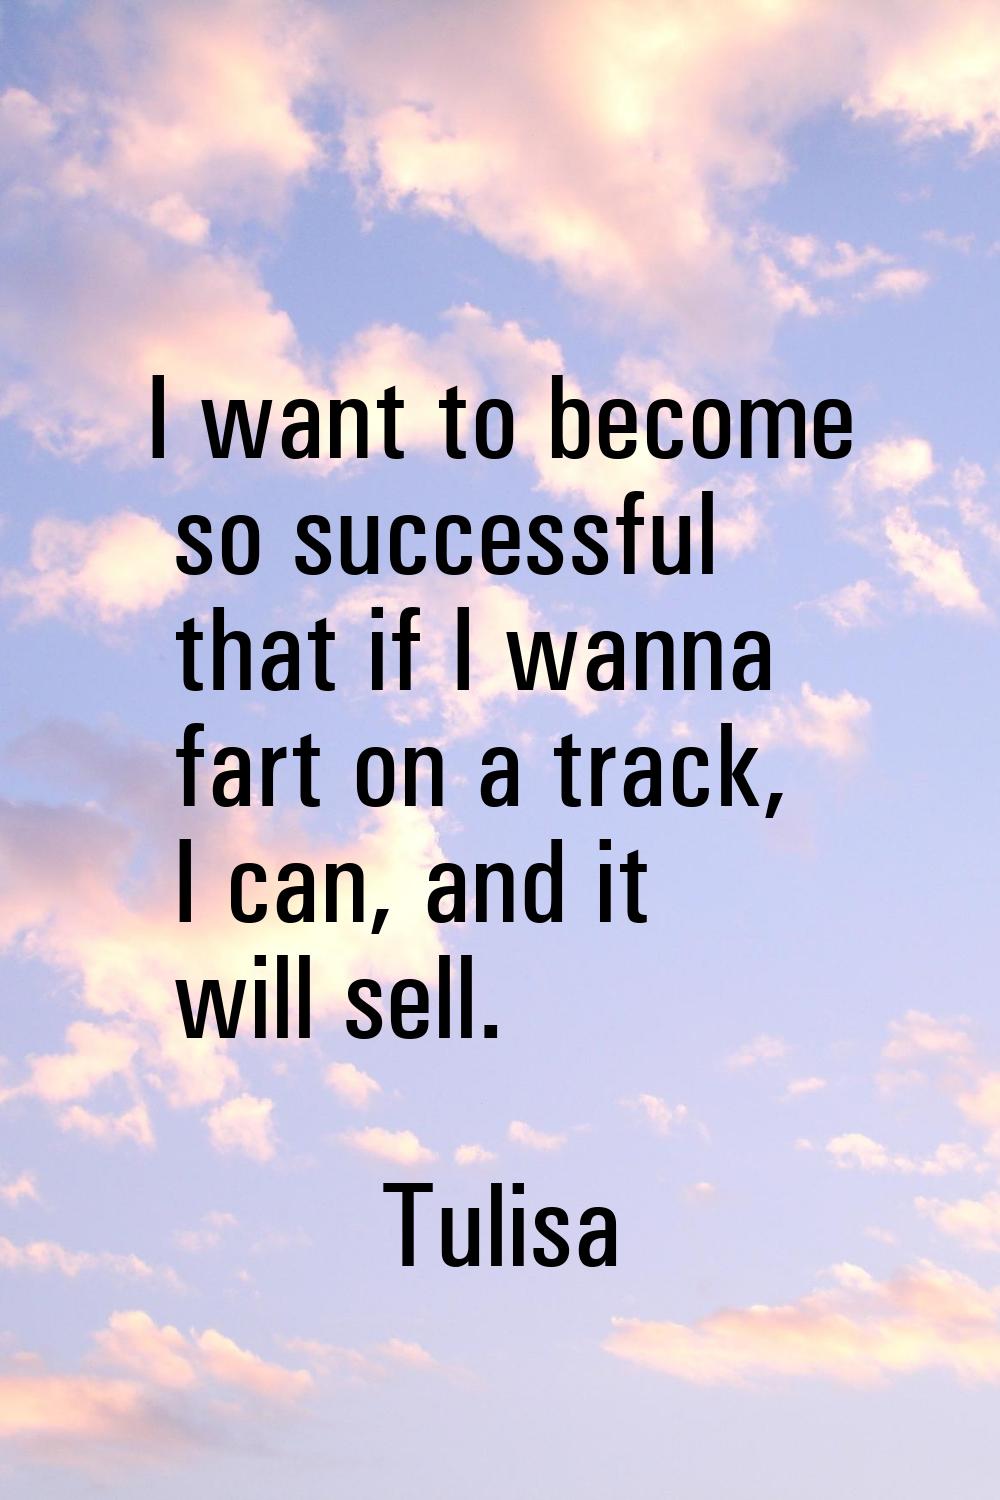 I want to become so successful that if I wanna fart on a track, I can, and it will sell.